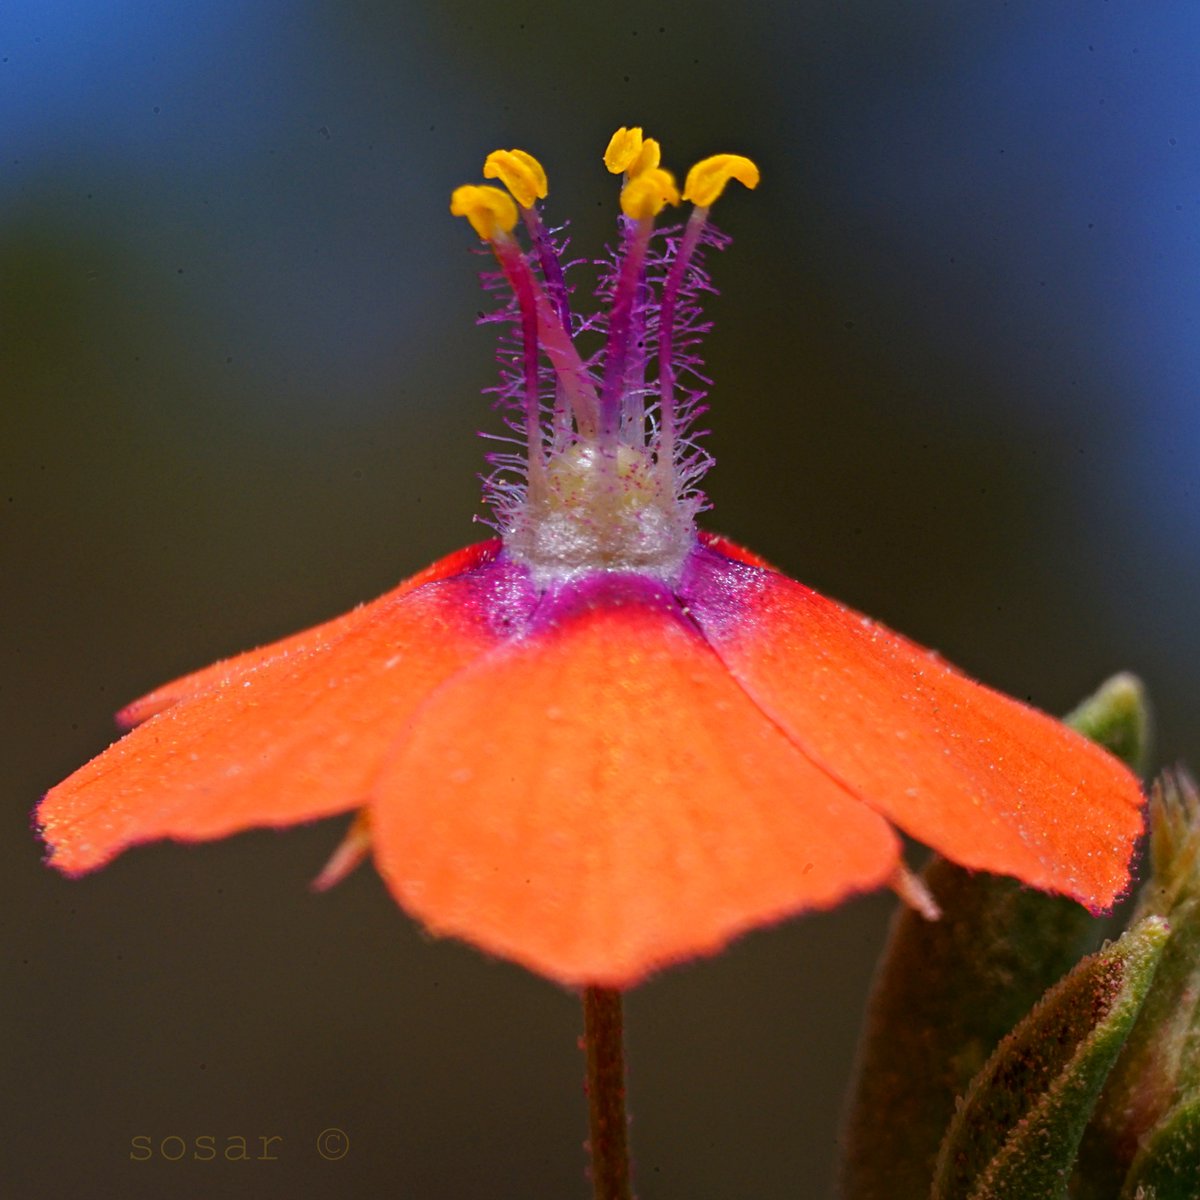 This exquisite photo of Scarlet Pimpernel (Lysimachia arvensis) in Mexico by sosar makes the ordinary look extraordinary. Its our Observation of the Day! #Mexico #Plants #Weeds More info: inaturalist.org/observations/1…